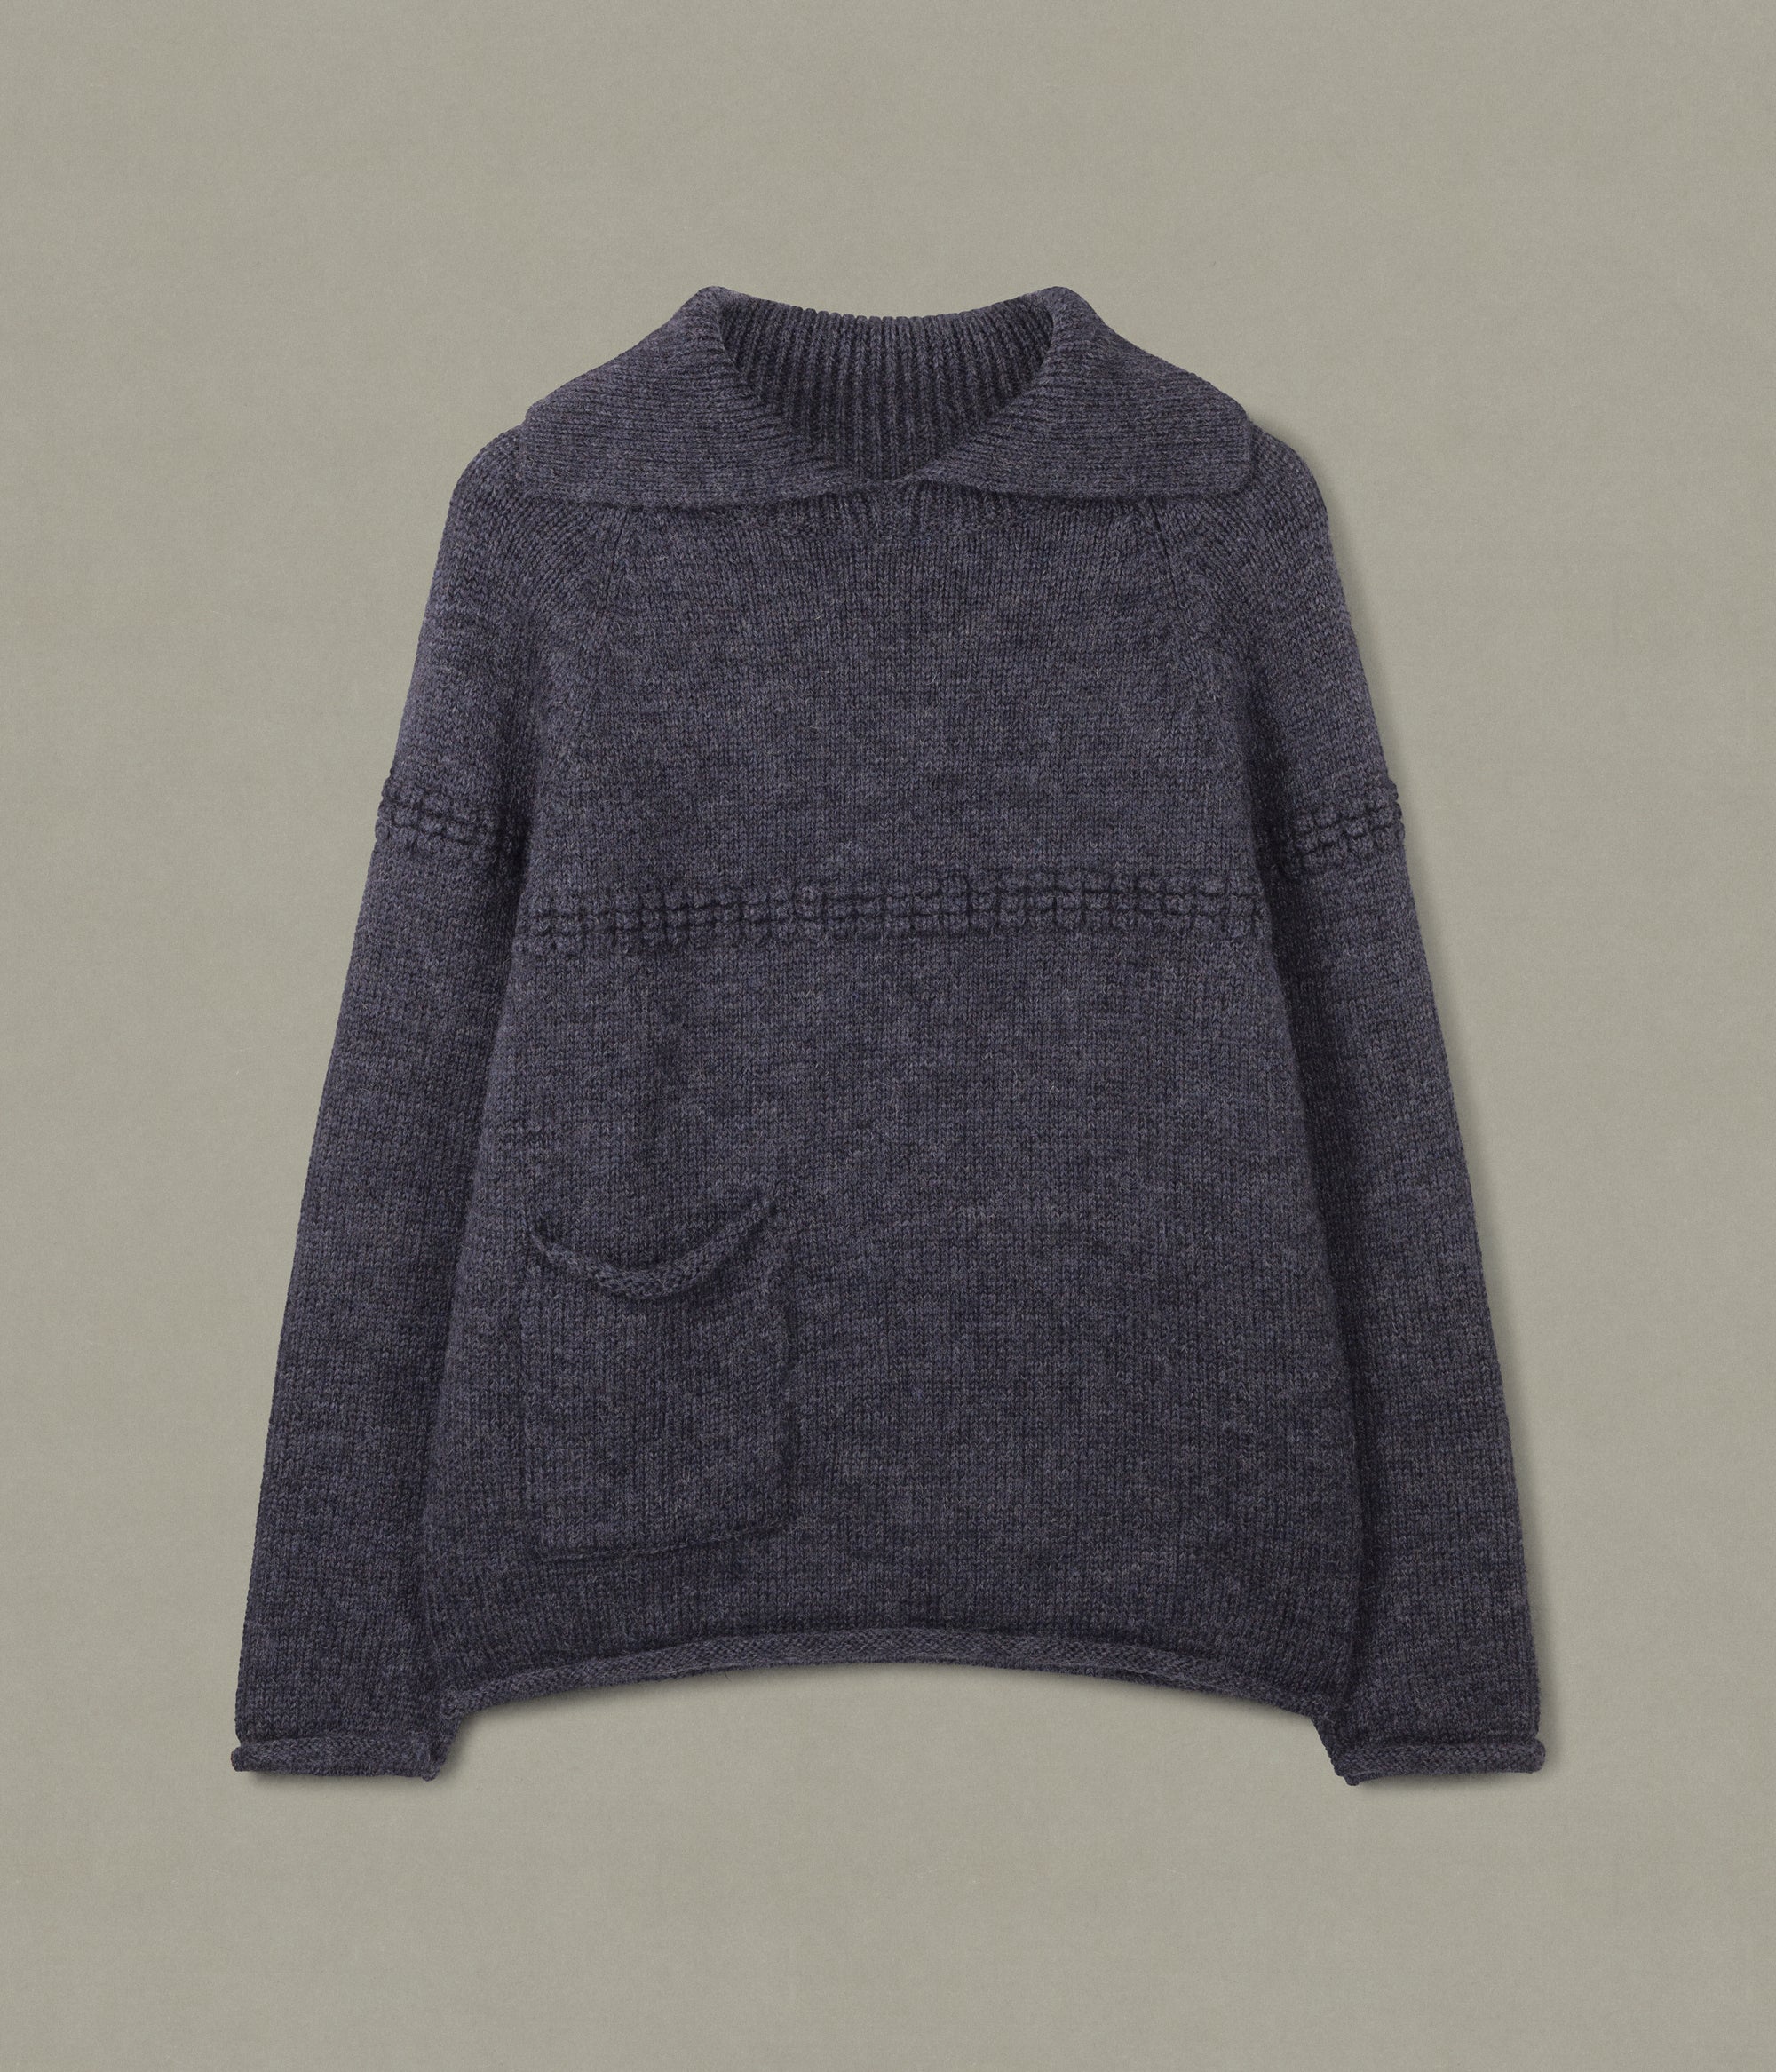 Sailor's Neck Sweater, Charcoal